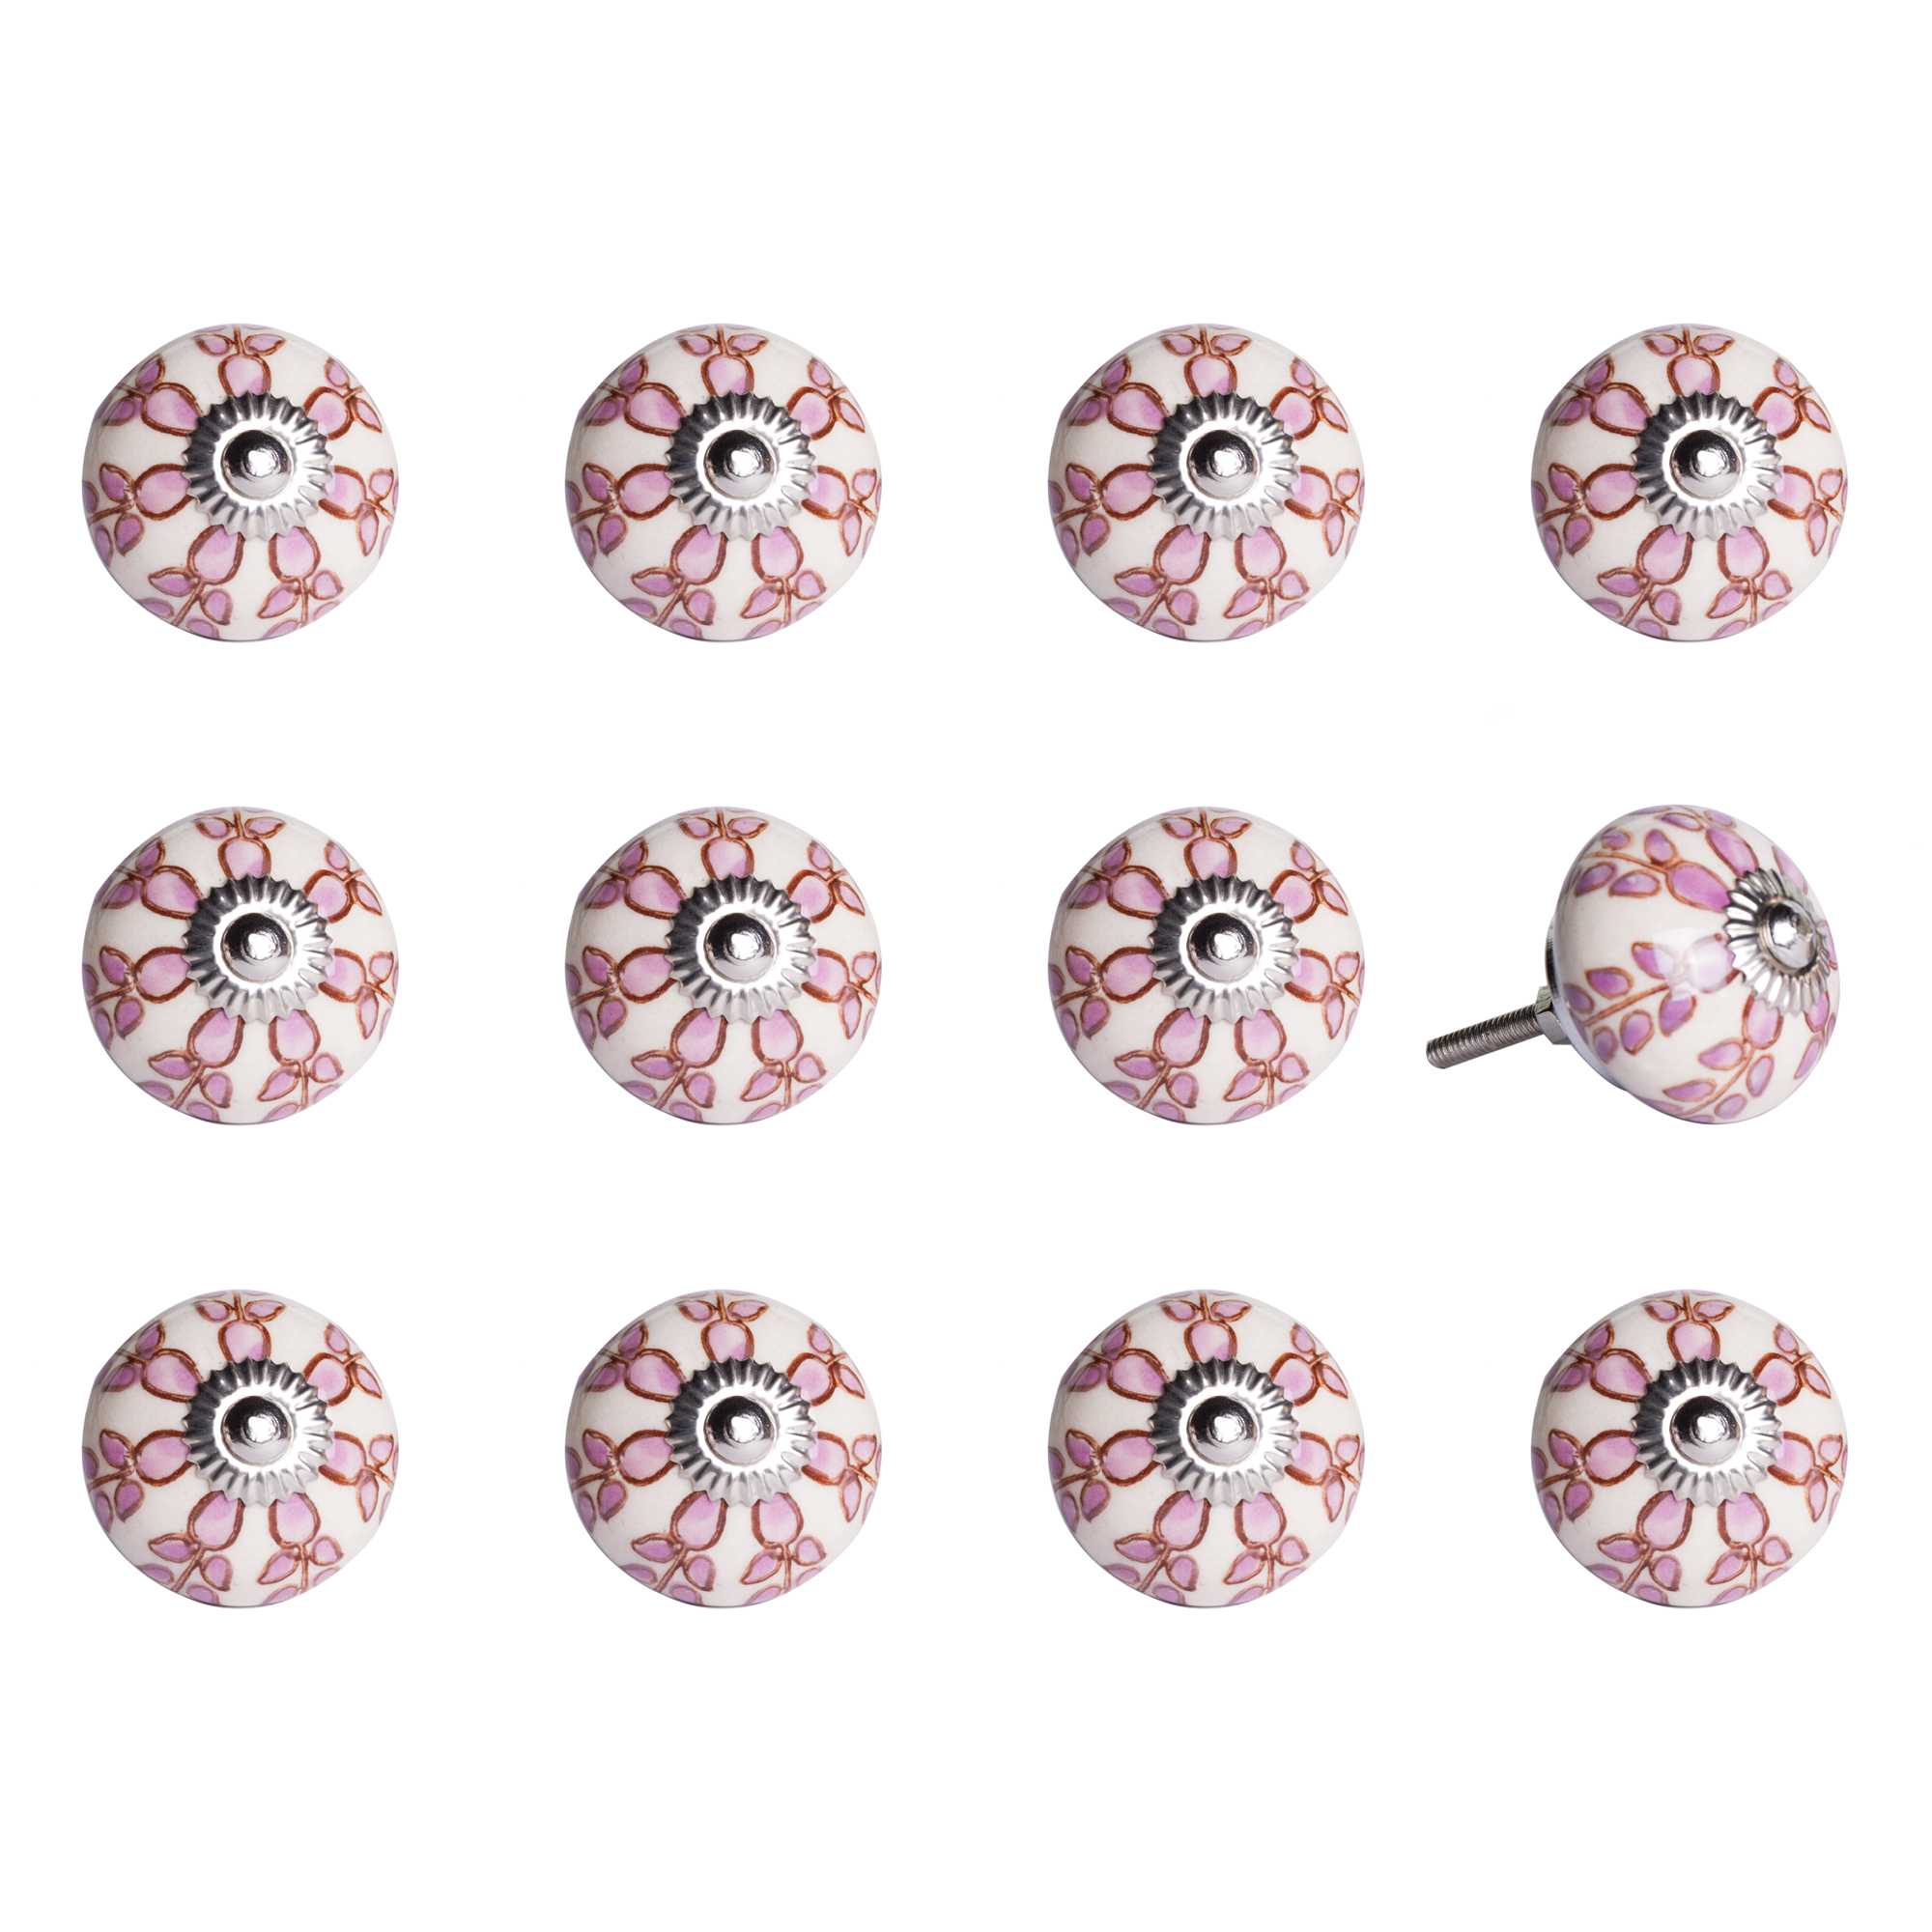 1.5" x 1.5" x 1.5" White, Pink and Burgundy - Knobs 12-Pack